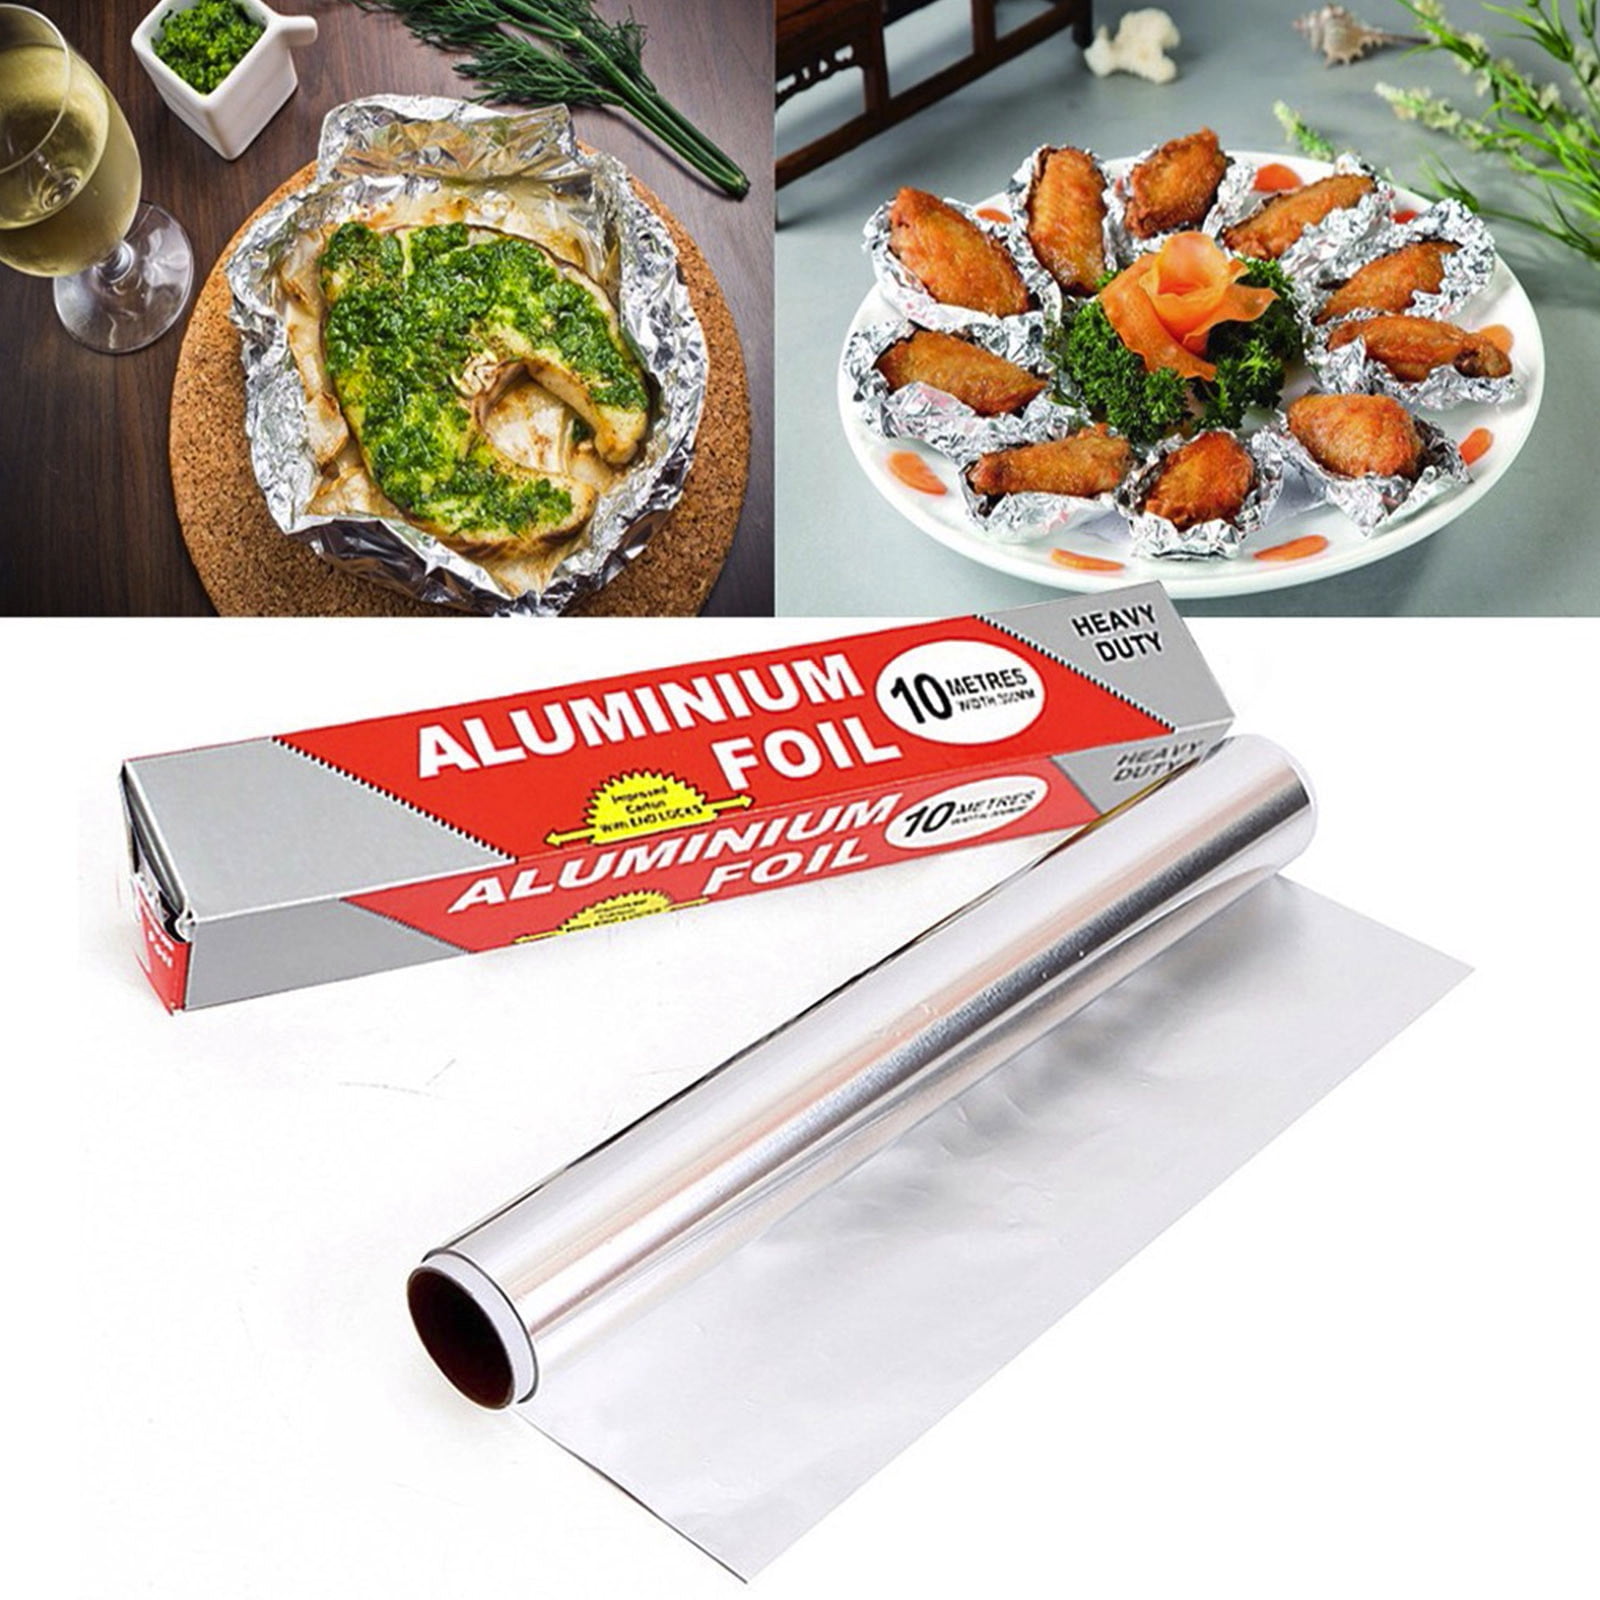 GRILLING OR WRAPPER KITCHEN ALUMINIUM FOIL CATERING FOOD BAKING OVEN  BAKING 